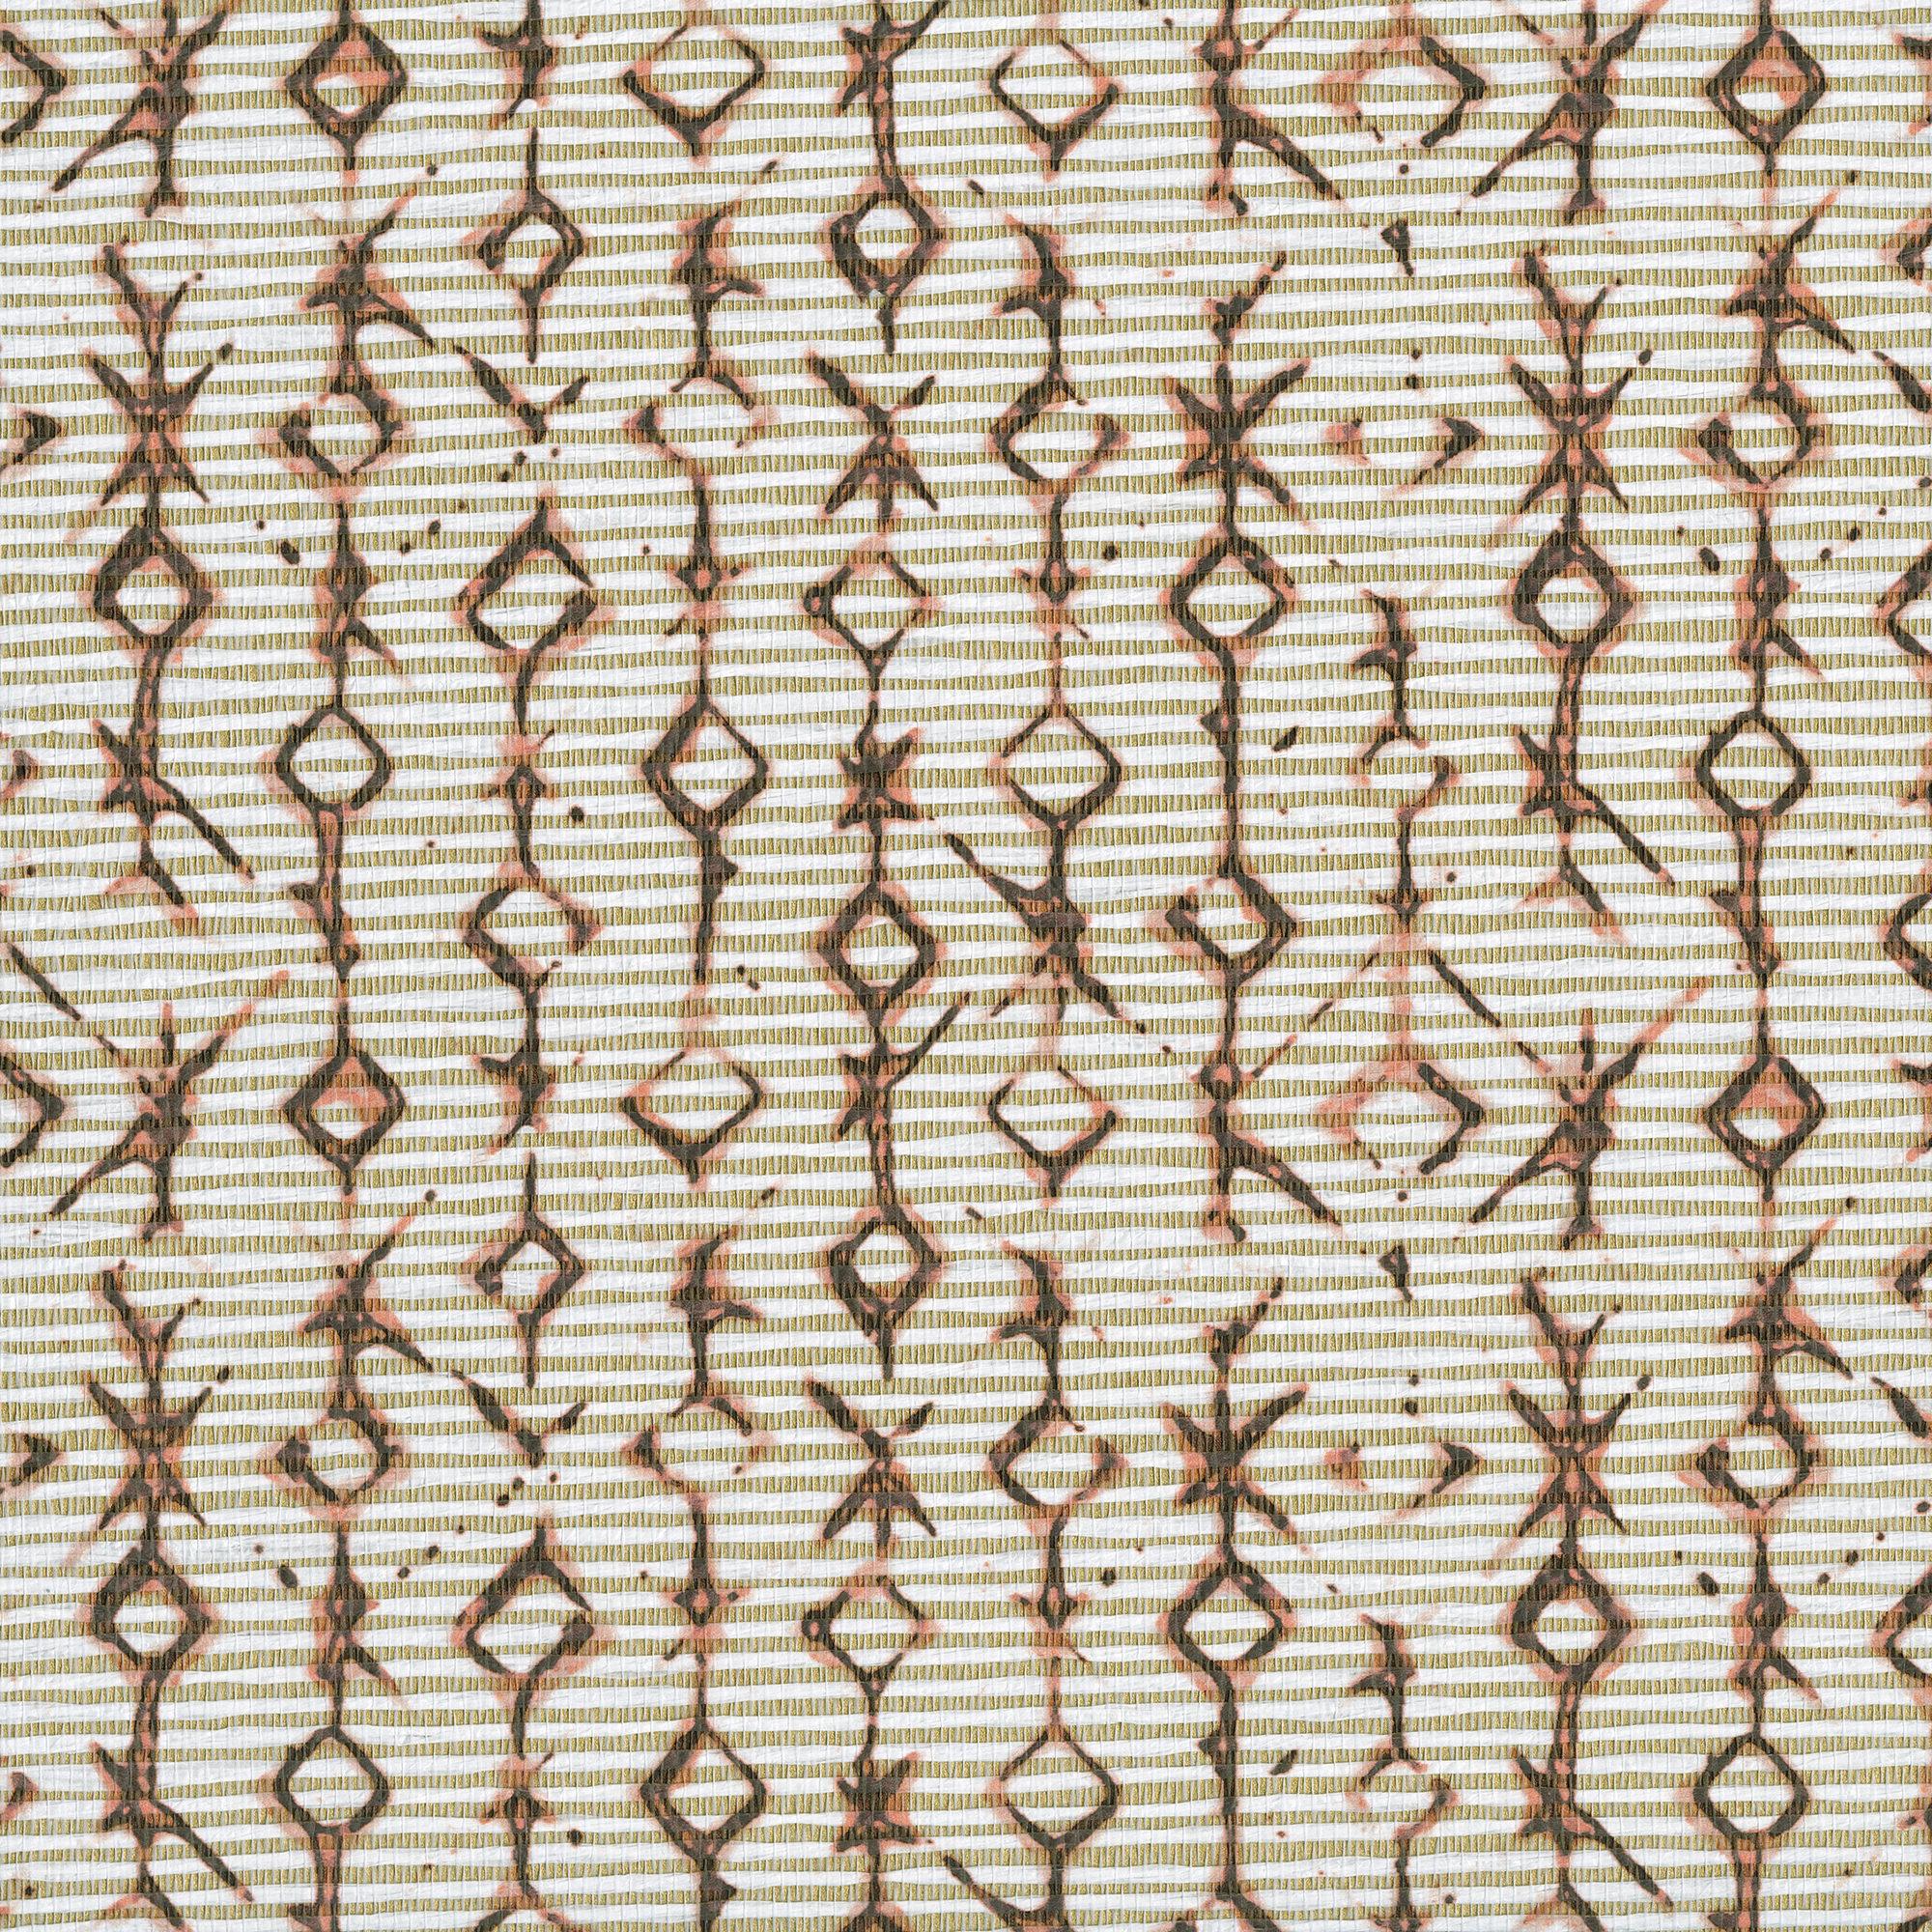 Contemporary Natural Patterned Paperweaves Wallcovering / Wallpaper, 11 Yard Roll